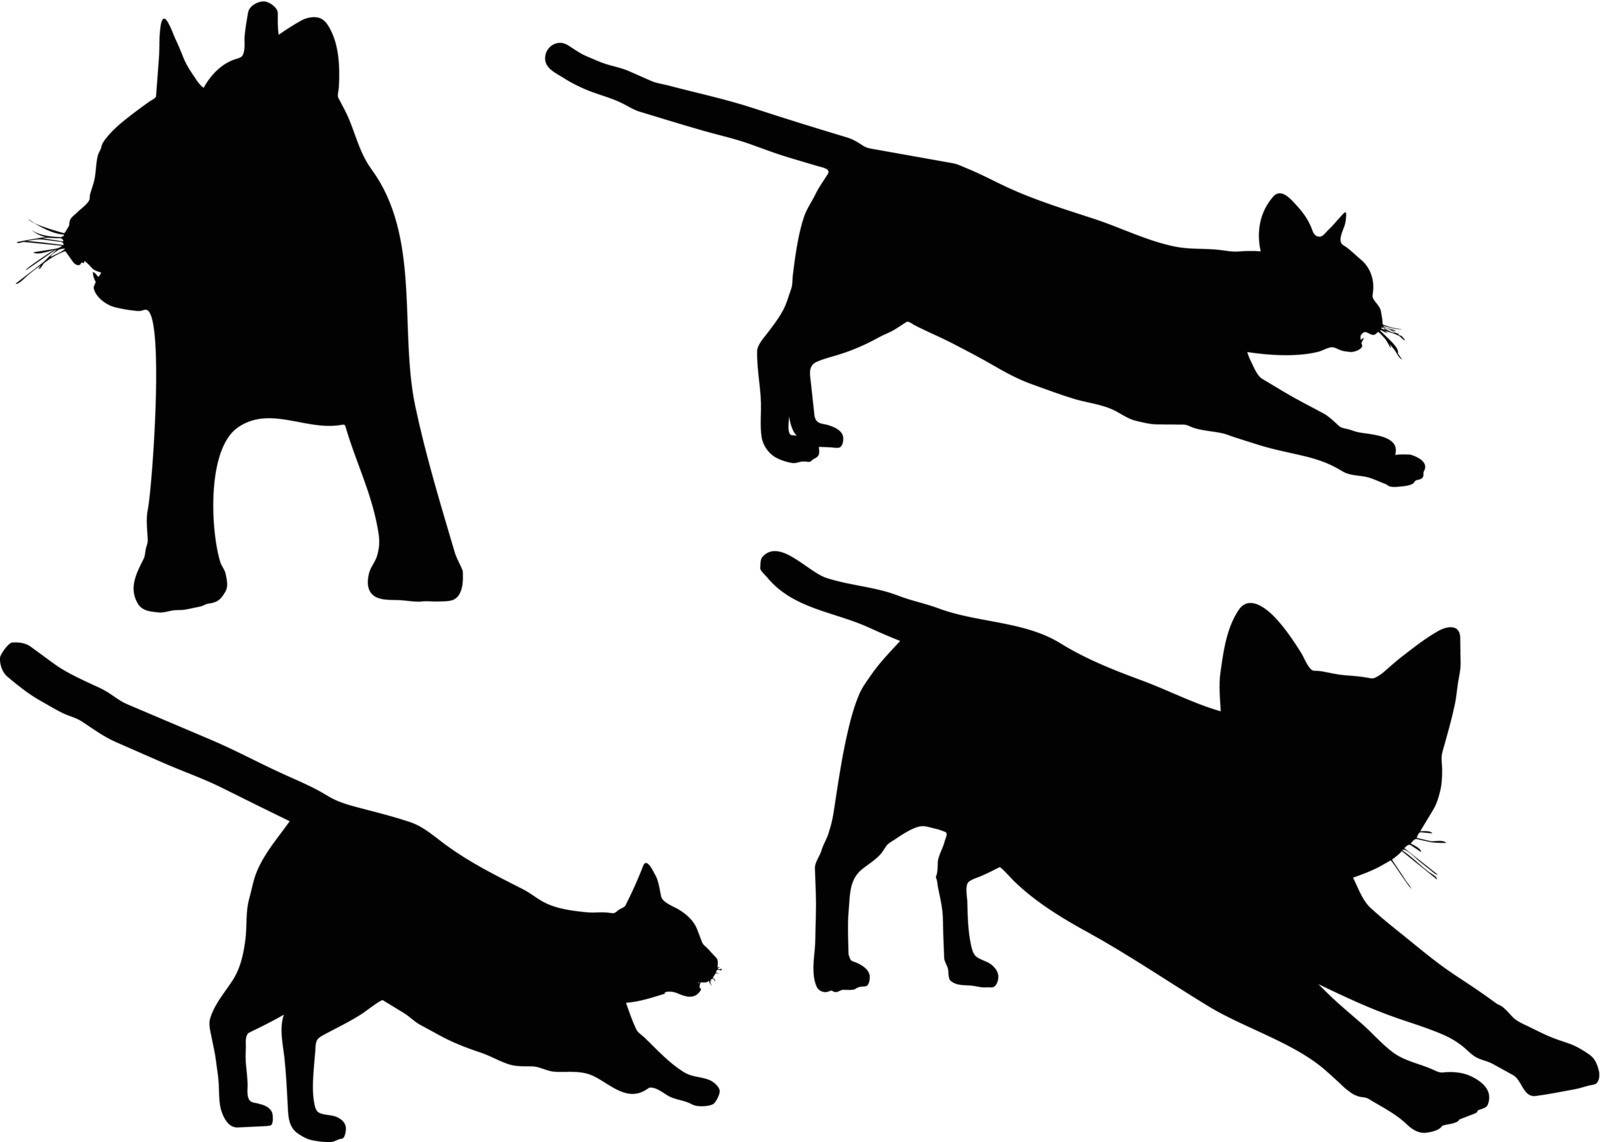 EPS 10 vector collection of cats silhouettes

